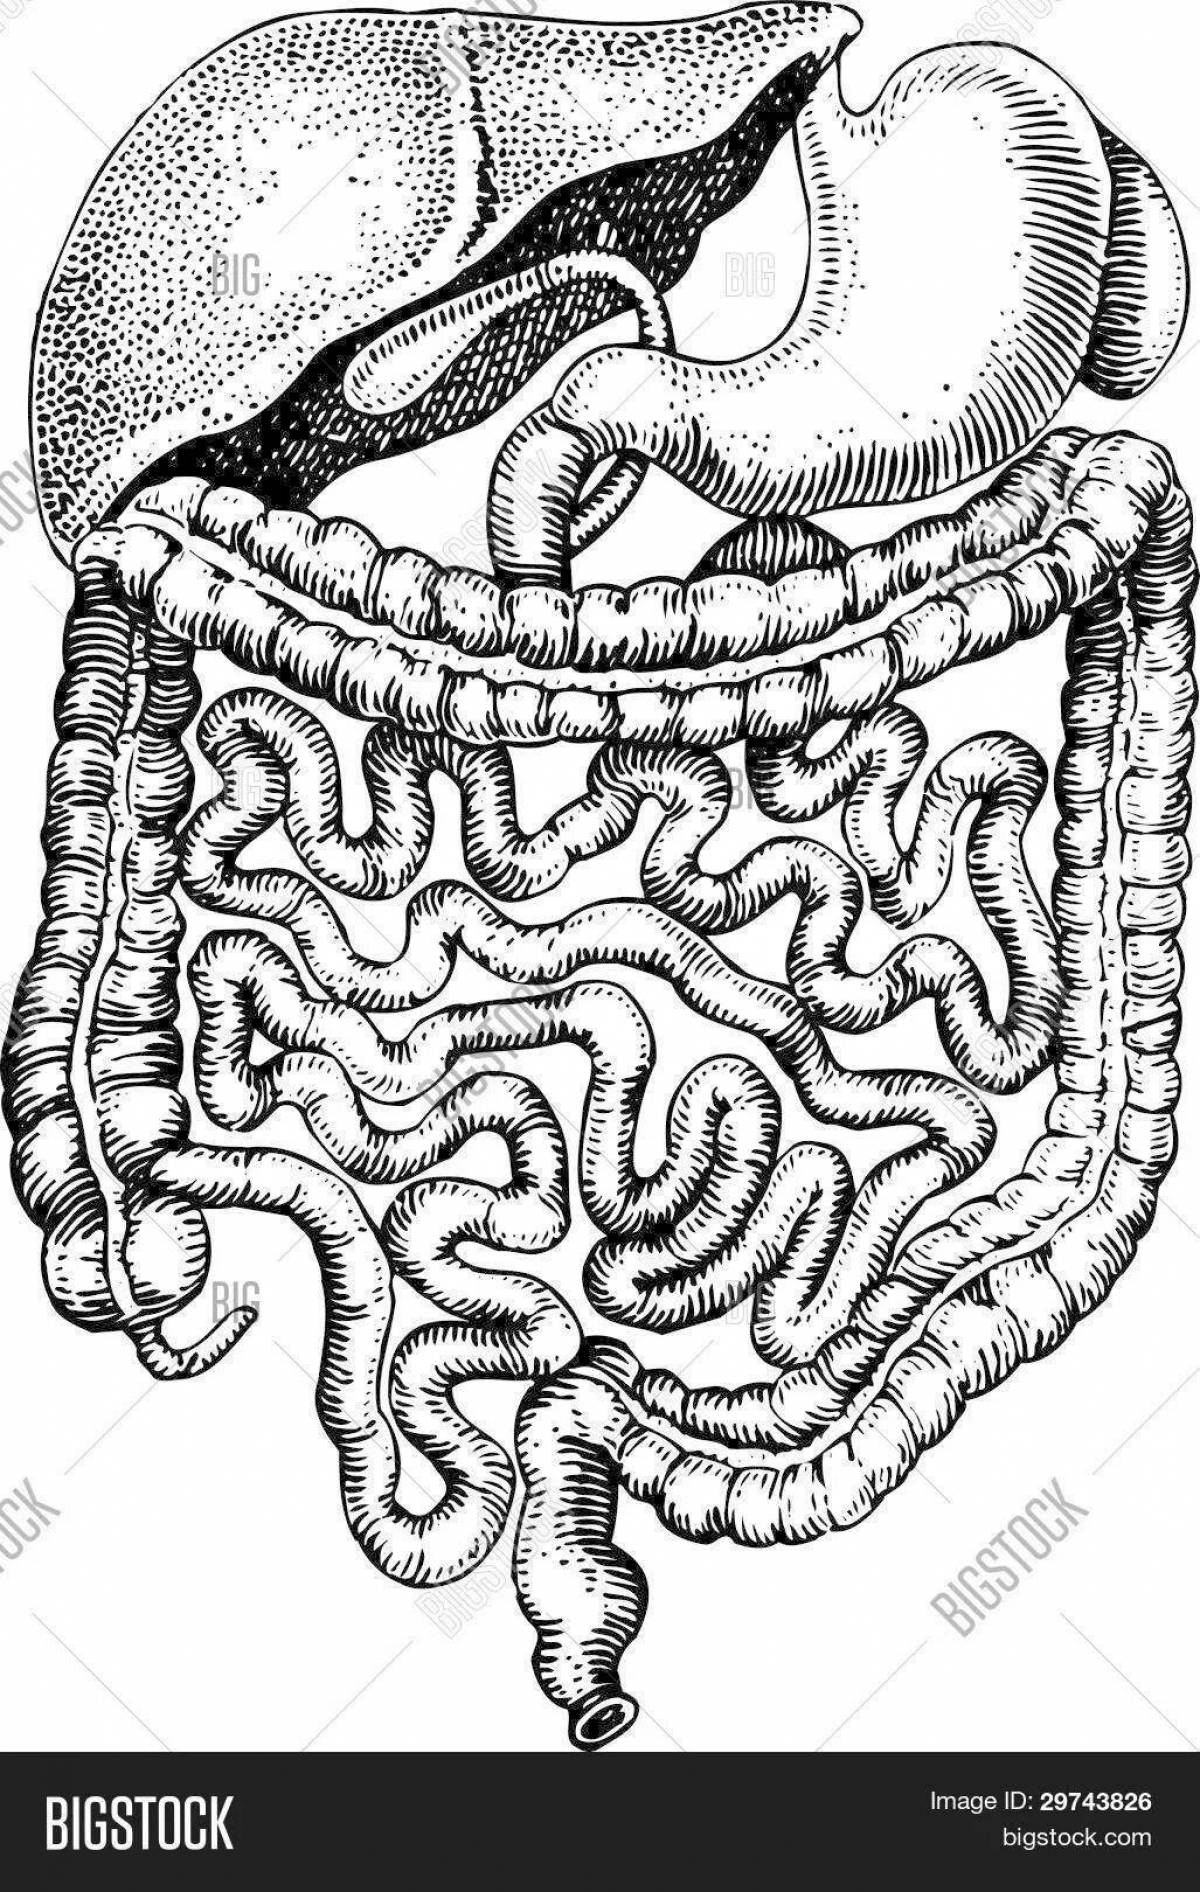 Excellent human intestine coloring